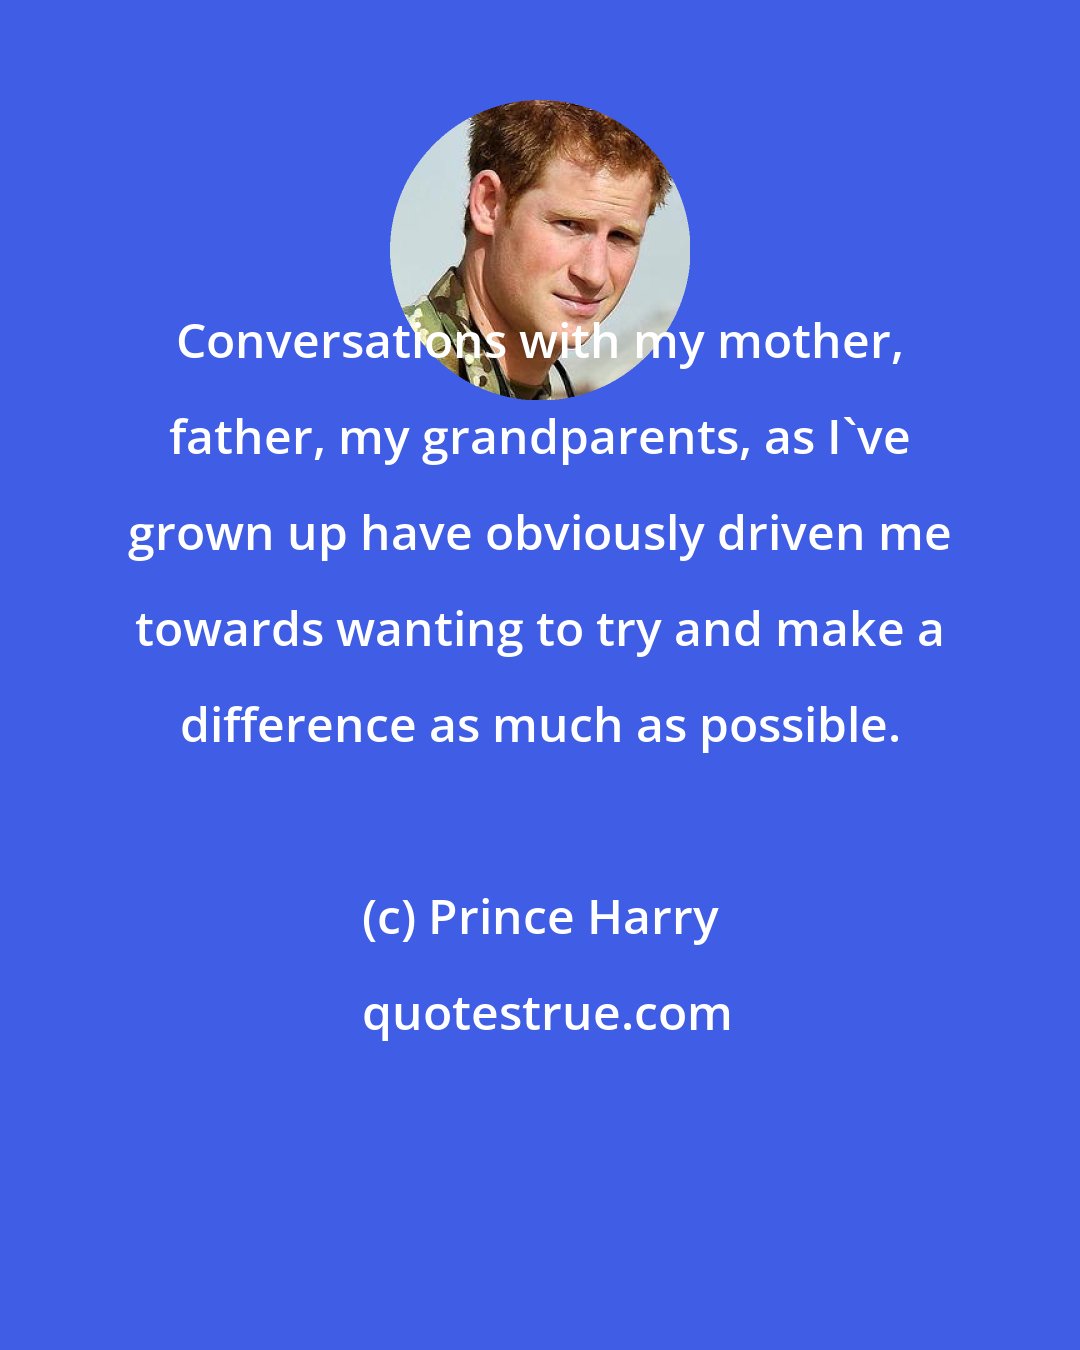 Prince Harry: Conversations with my mother, father, my grandparents, as I've grown up have obviously driven me towards wanting to try and make a difference as much as possible.